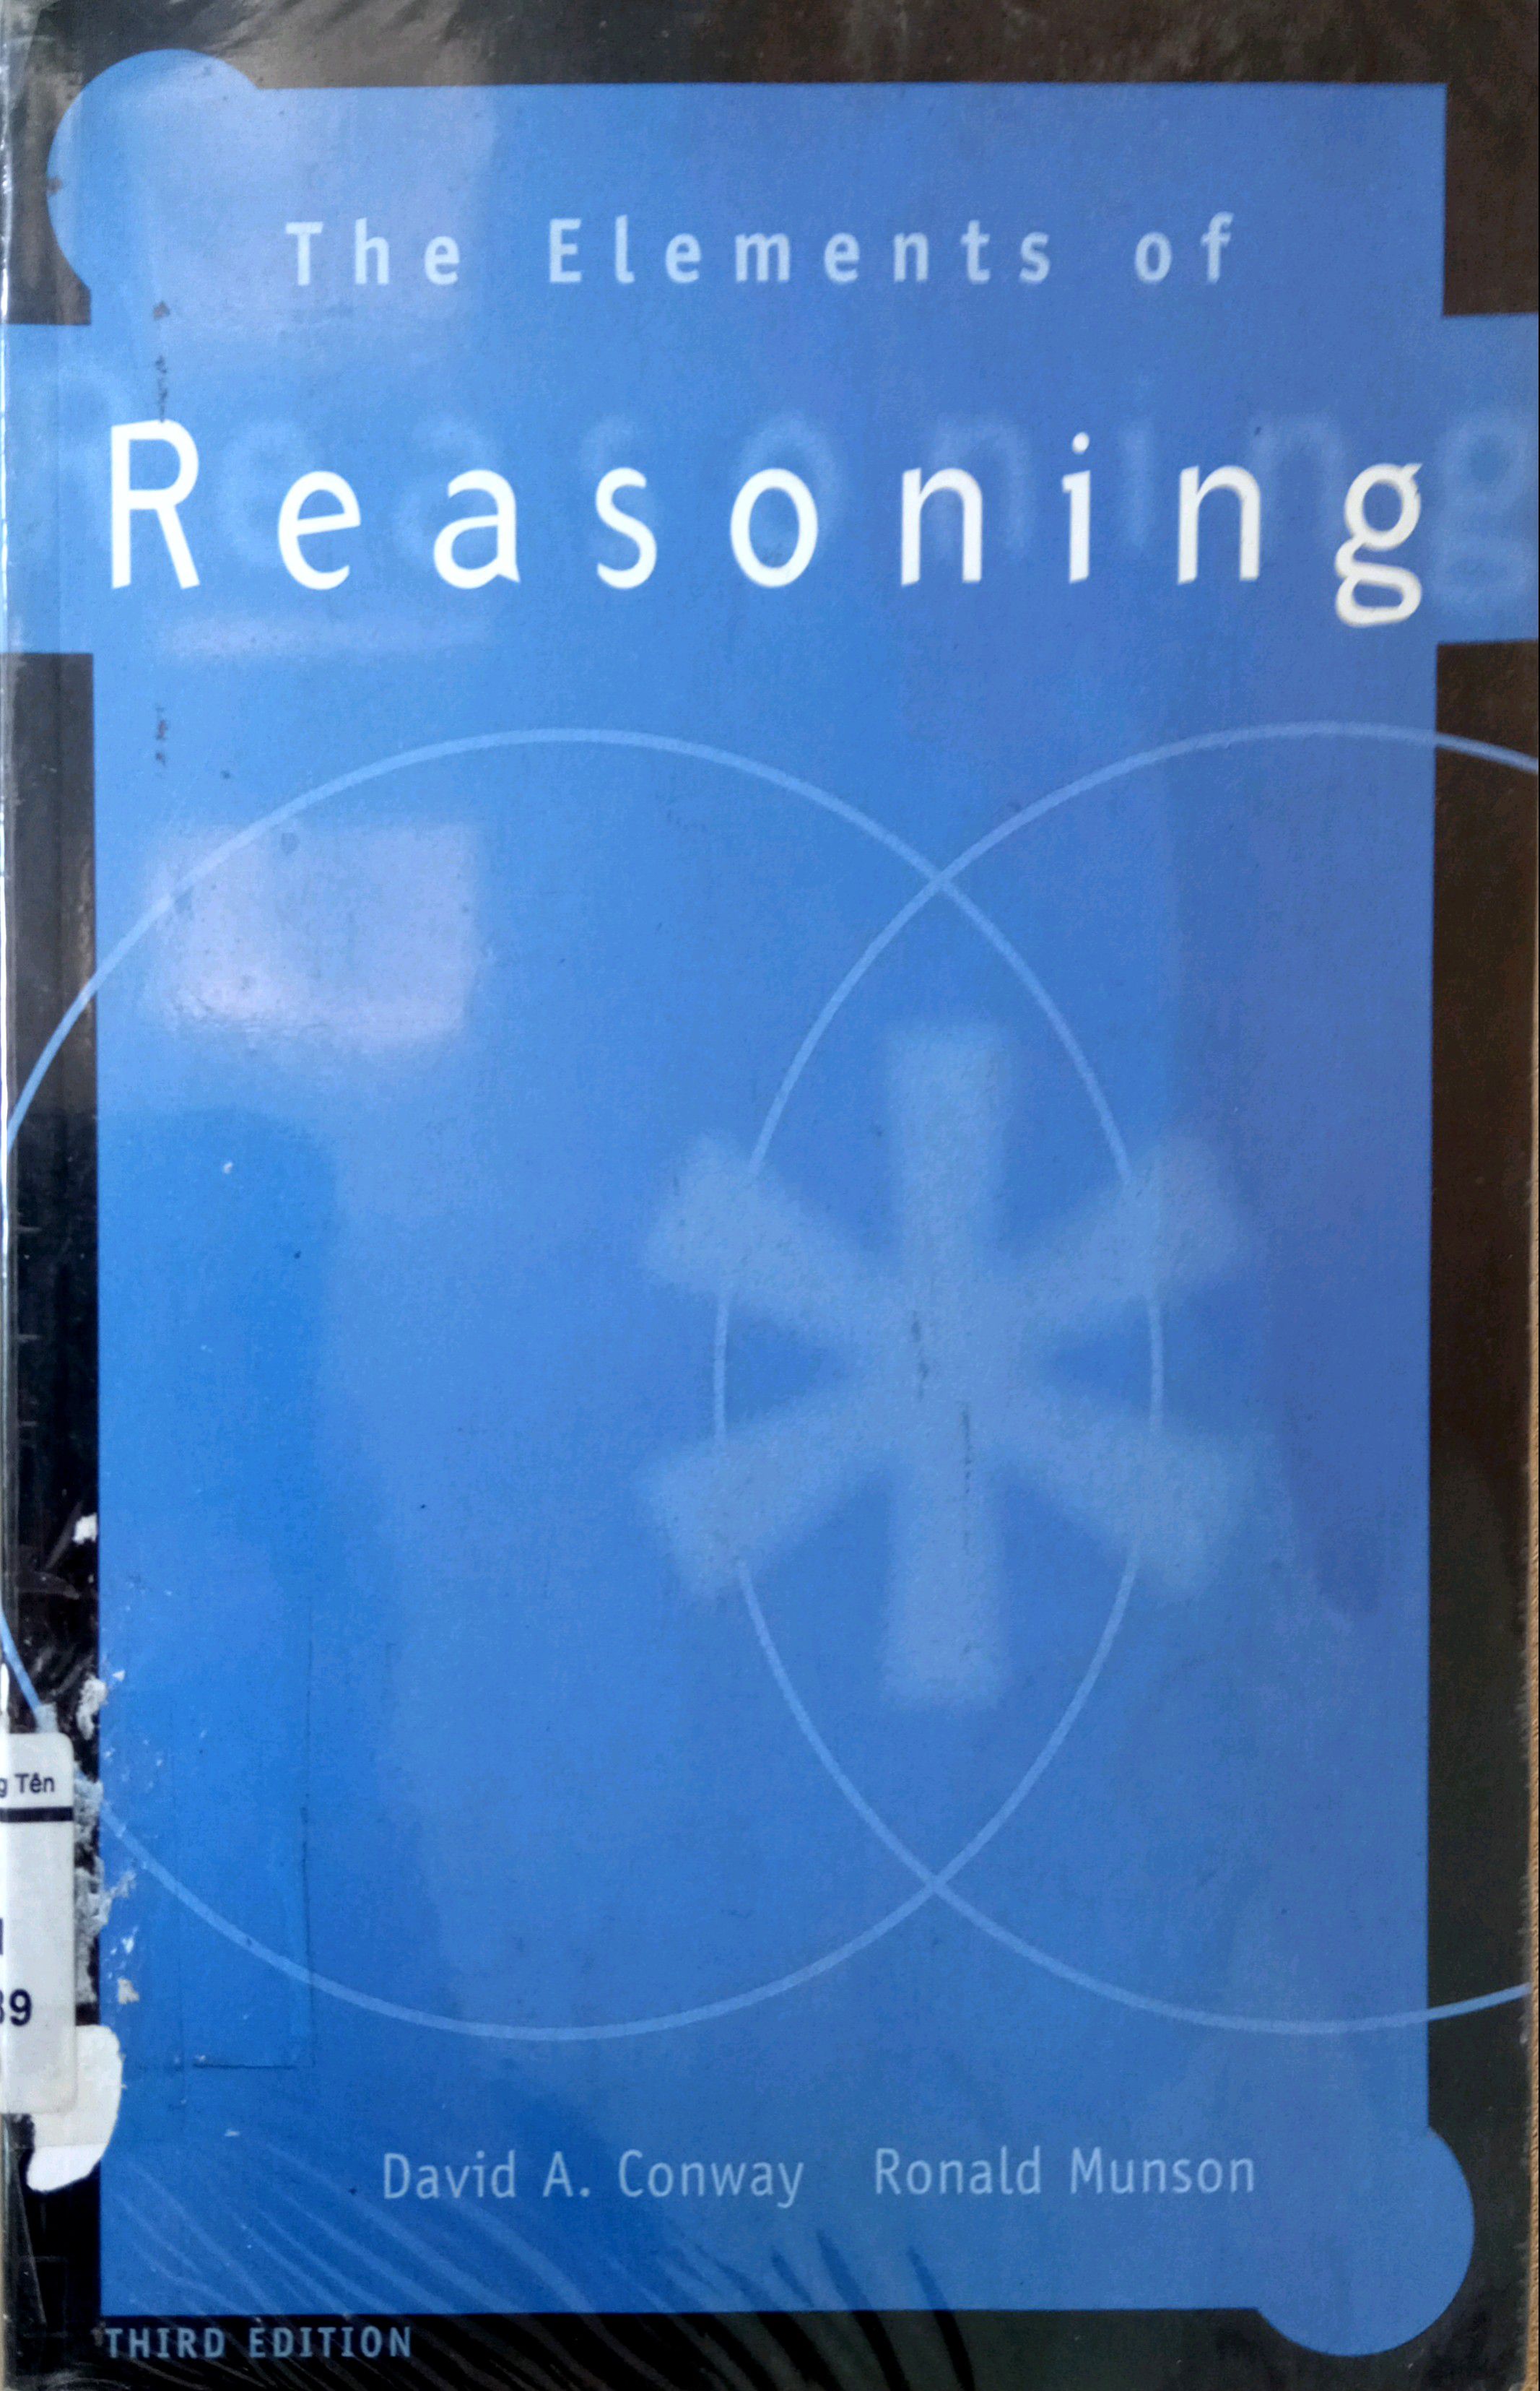 THE ELEMENTS OF REASONING